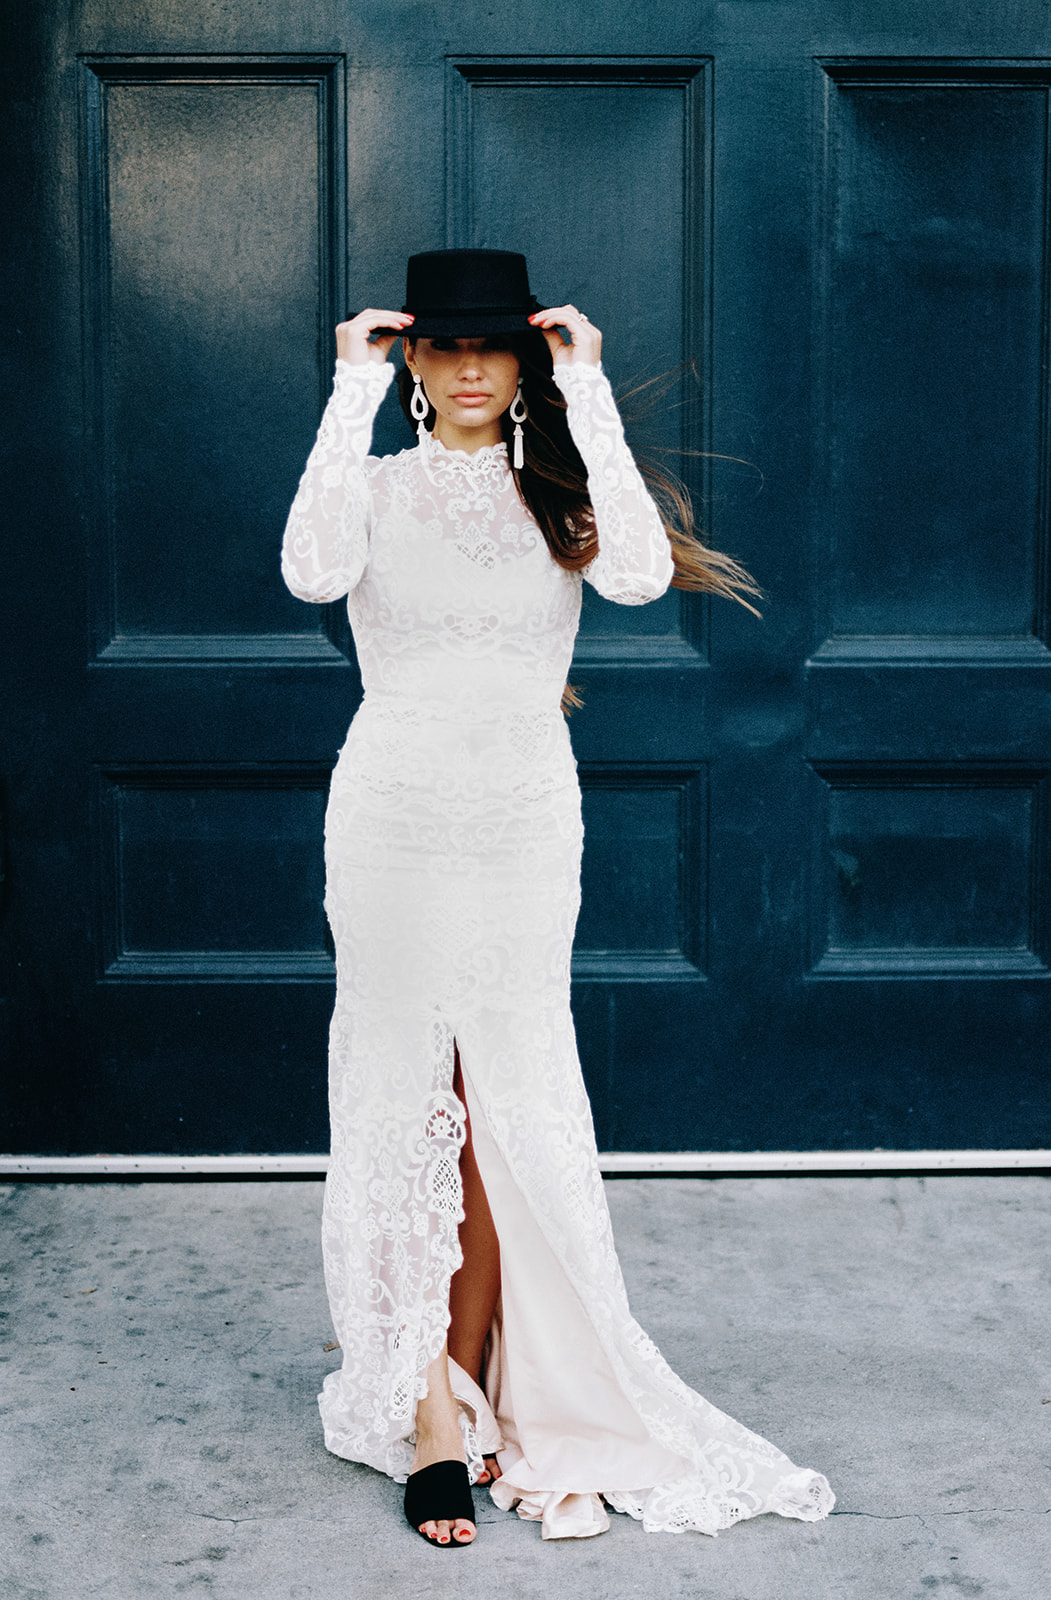 A female with long brunette hair posing for this San Francisco Bridal styled shoot. She holds a black hat that she wears on her head. She wears a long sleeve lace fitted wedding gown. Her earrings are long and white. The color of the door in the background is black.